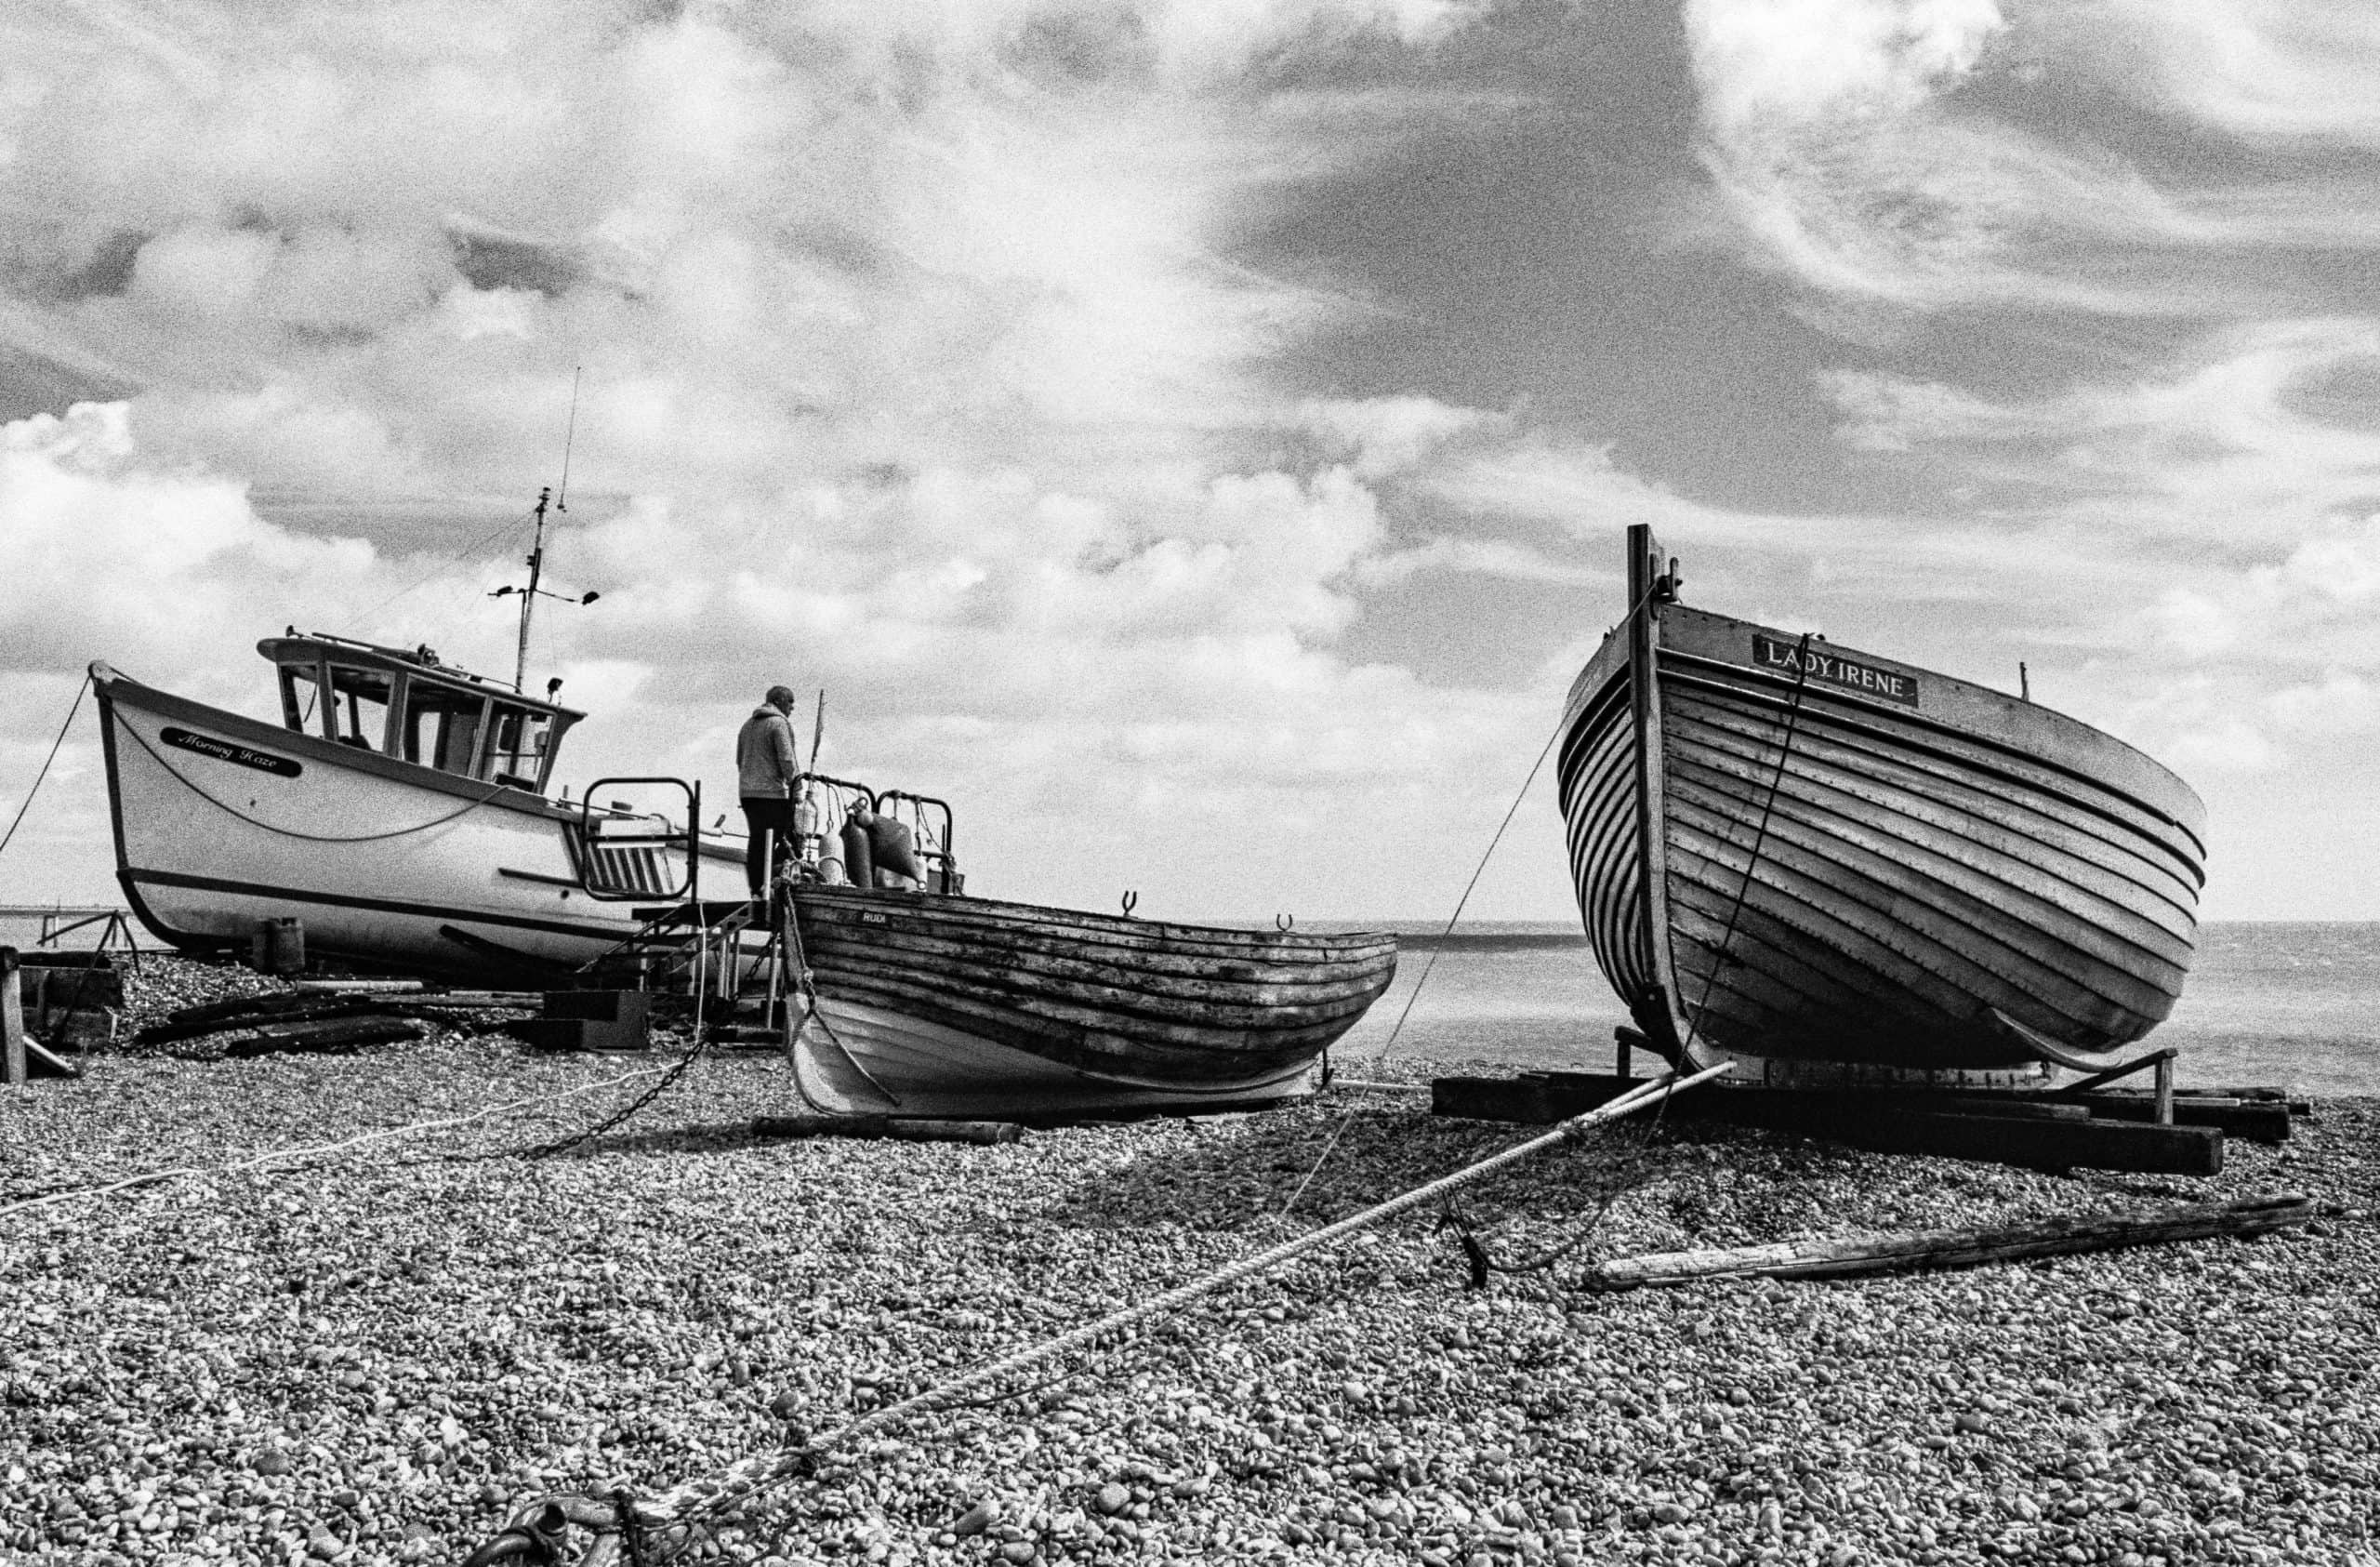 Boats of Deal (Film) - A Flash Of Darkness